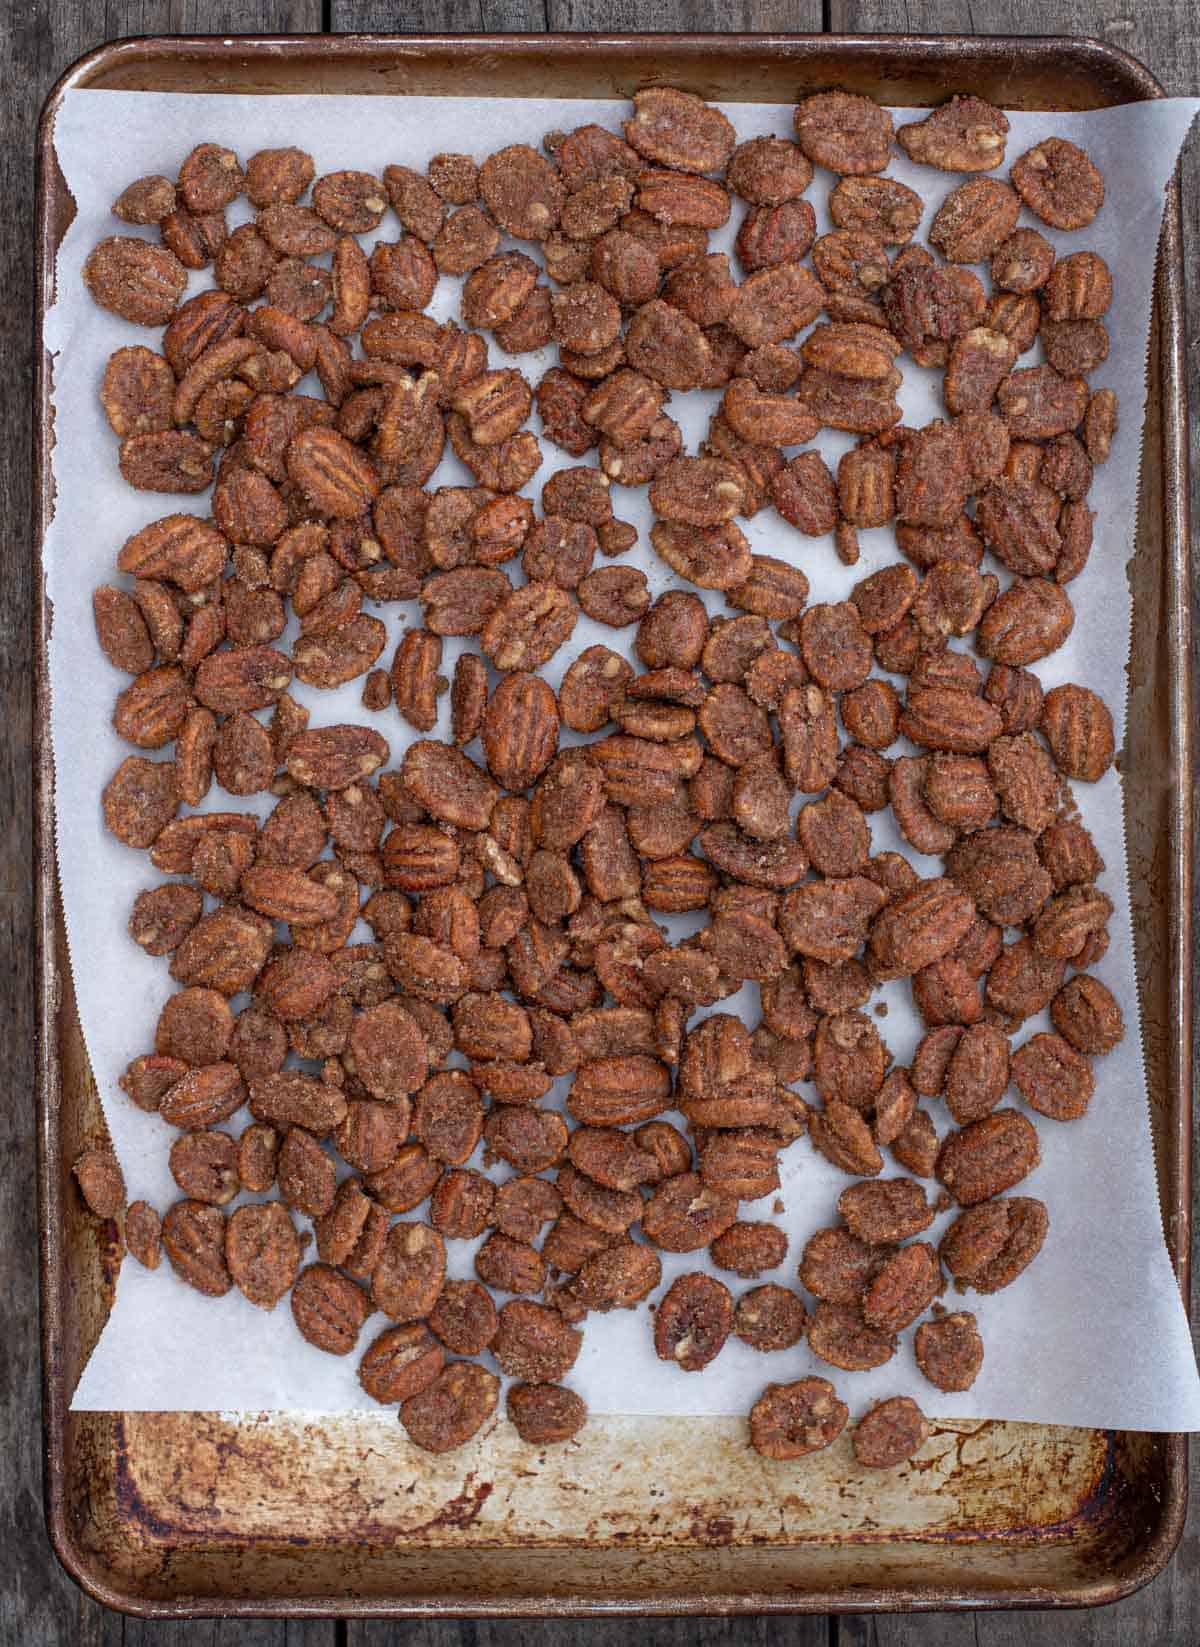 Candied pecans on a sheet pan